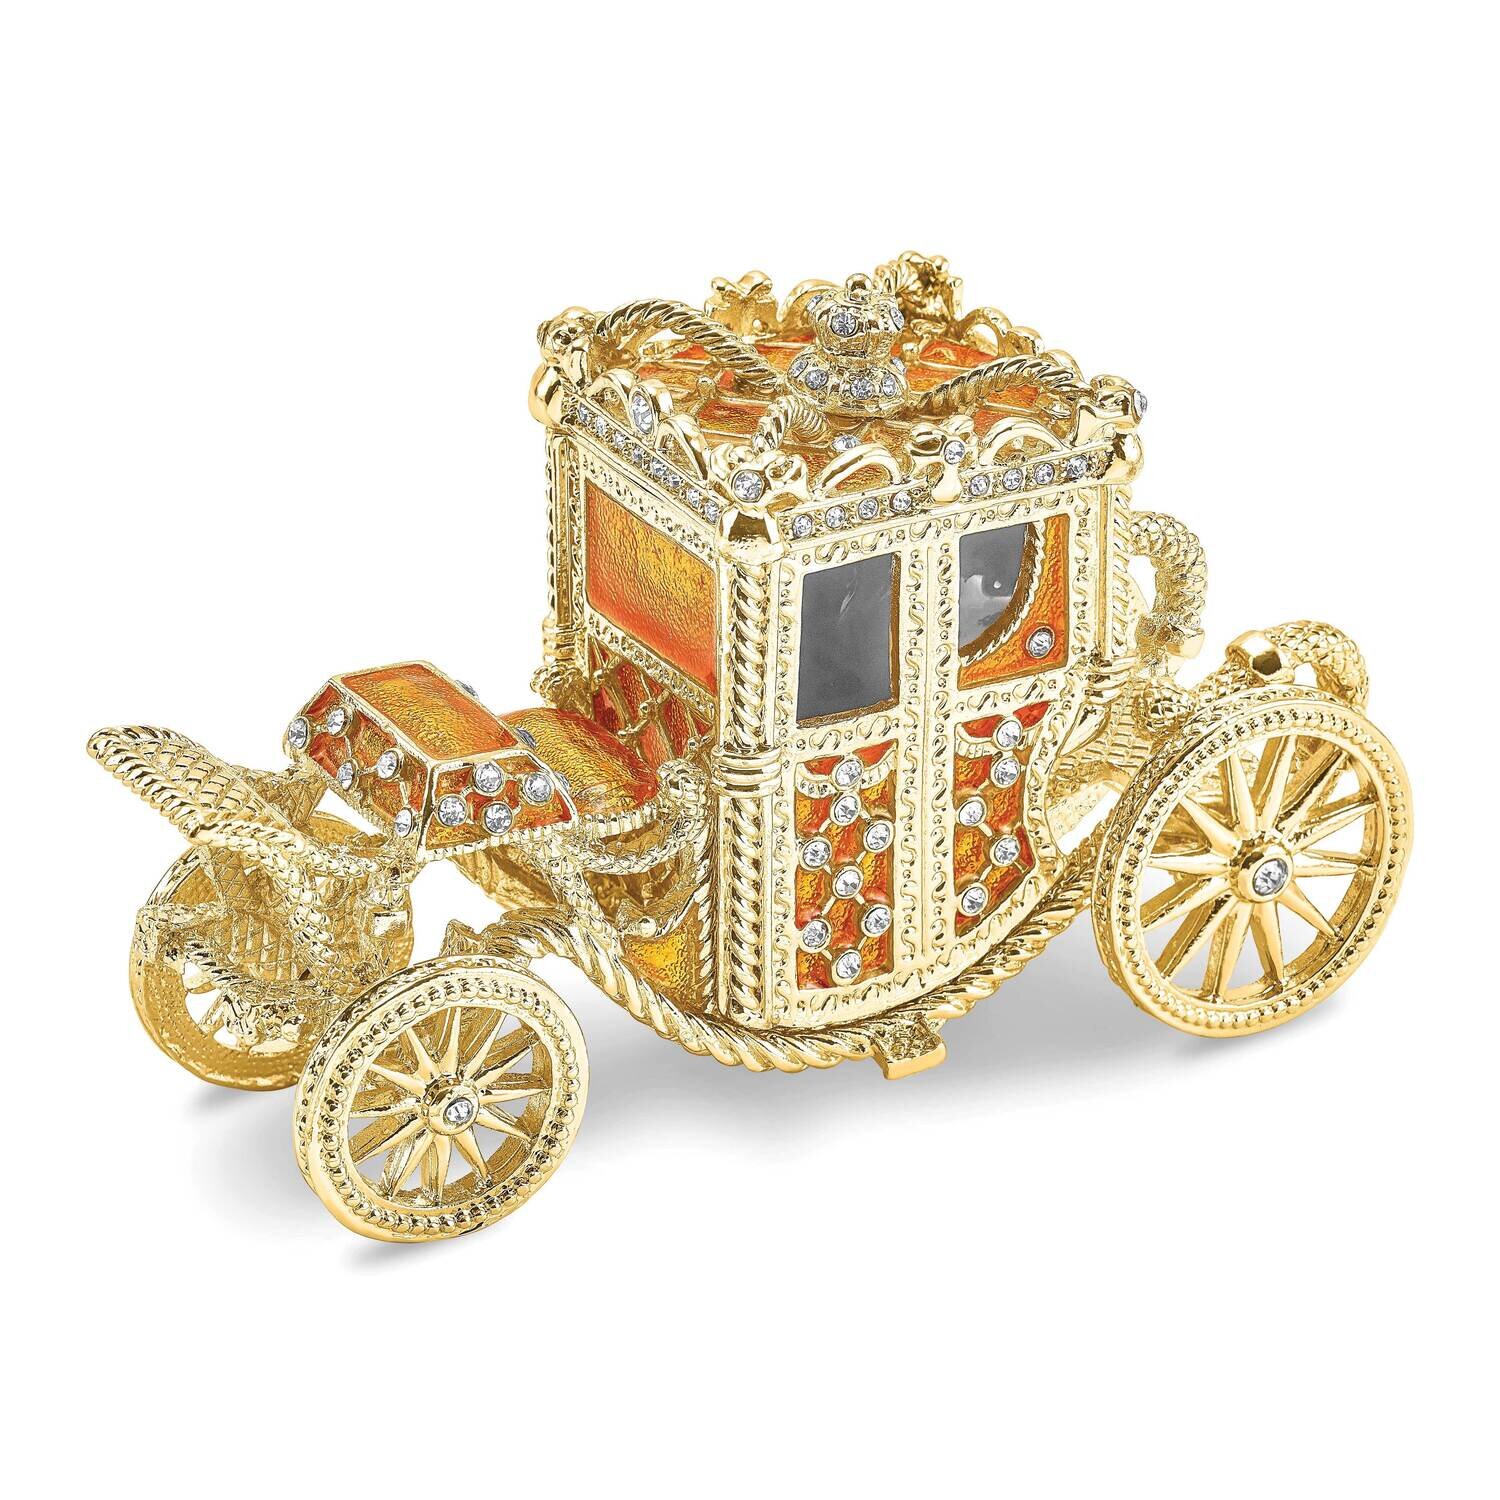 Imperial Golden Carriage Trinket Box Bejeweled BJ4078